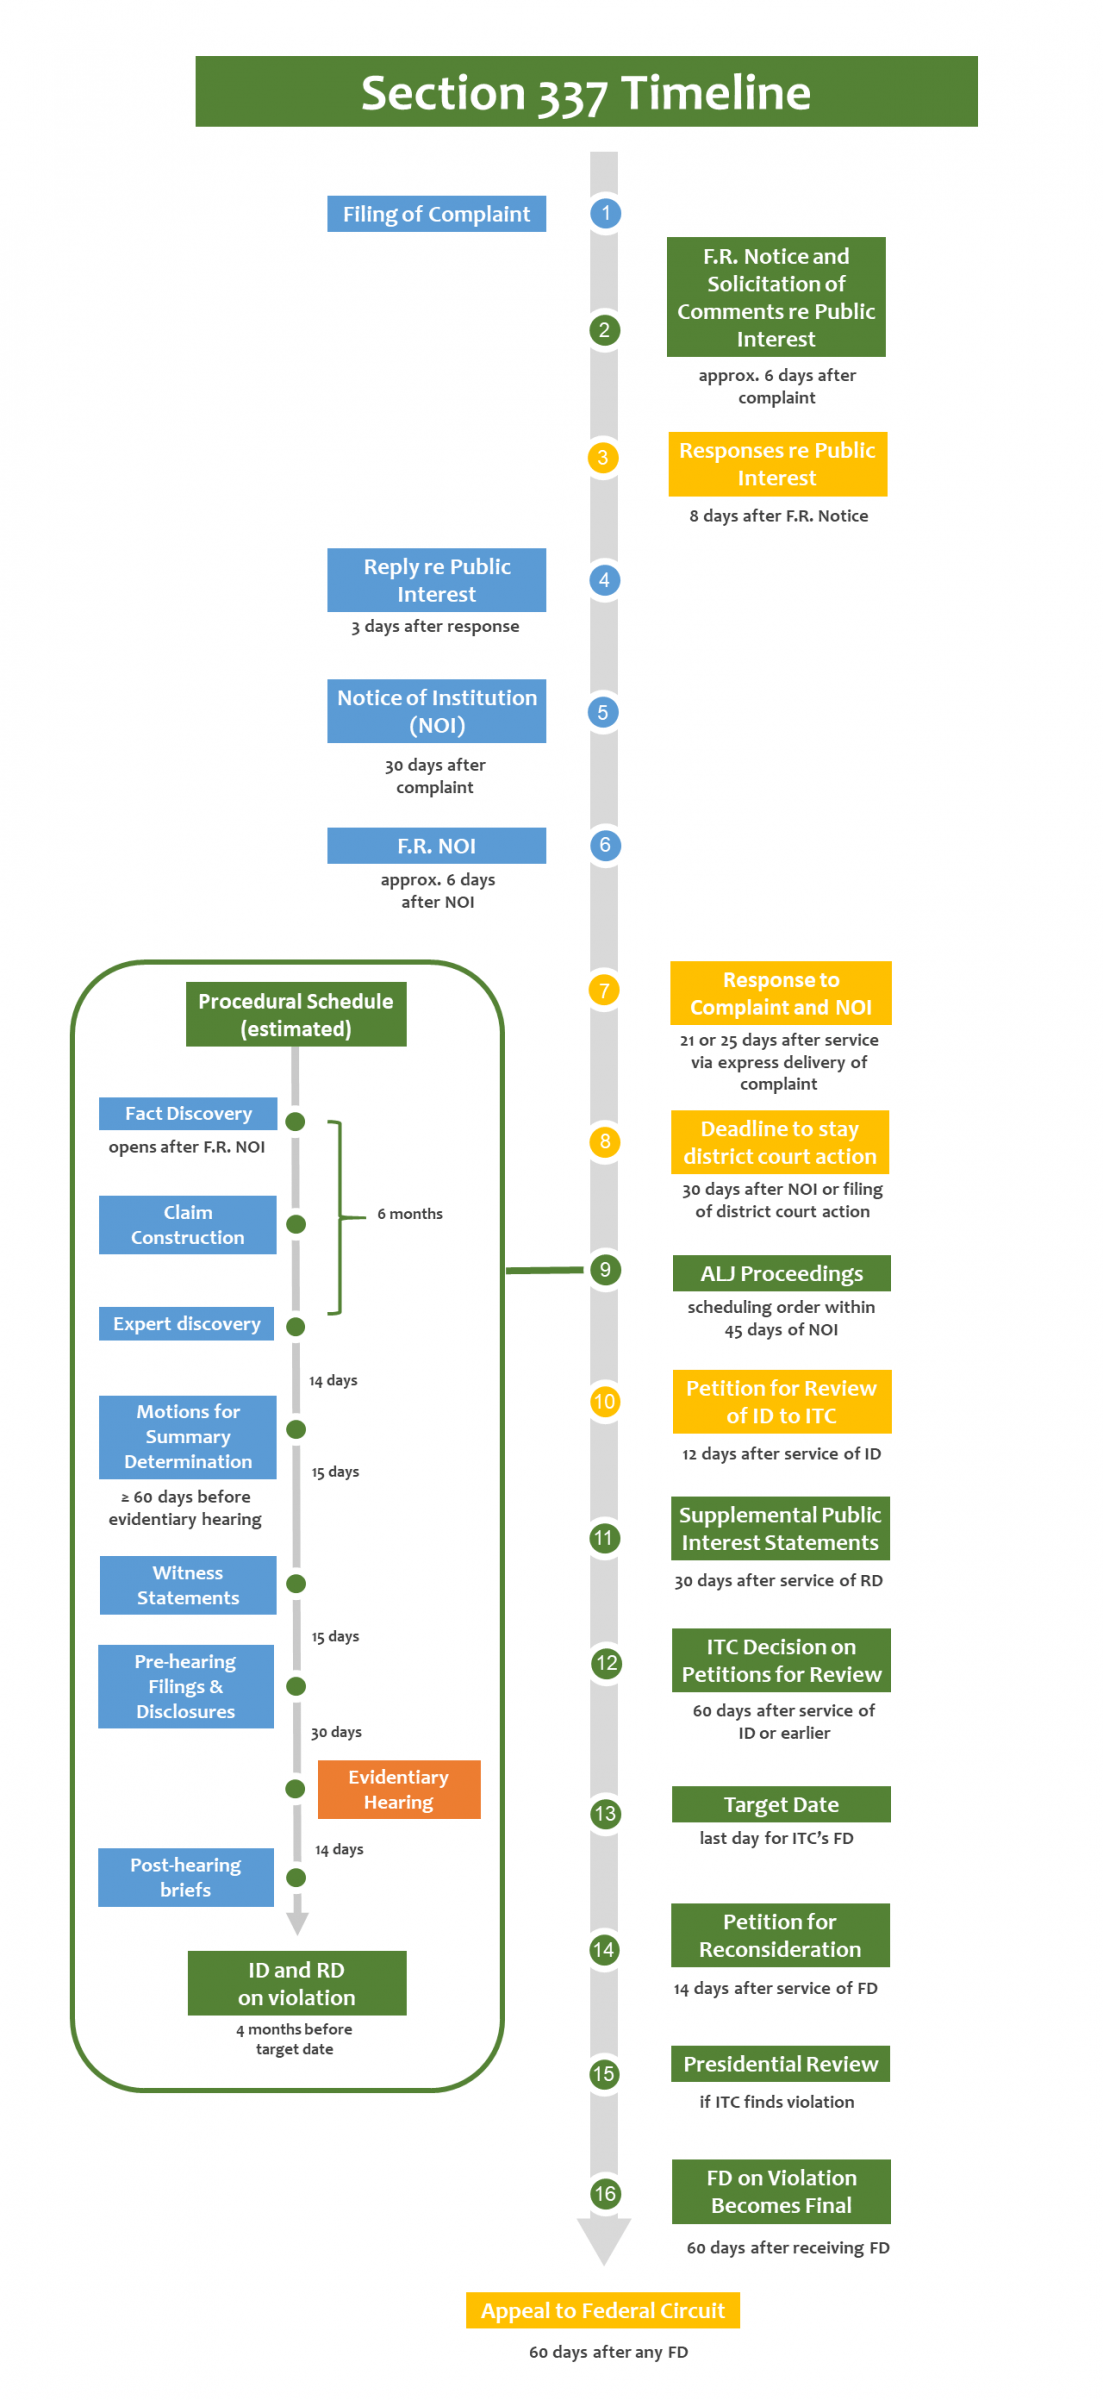 ITC Section 337 Timeline